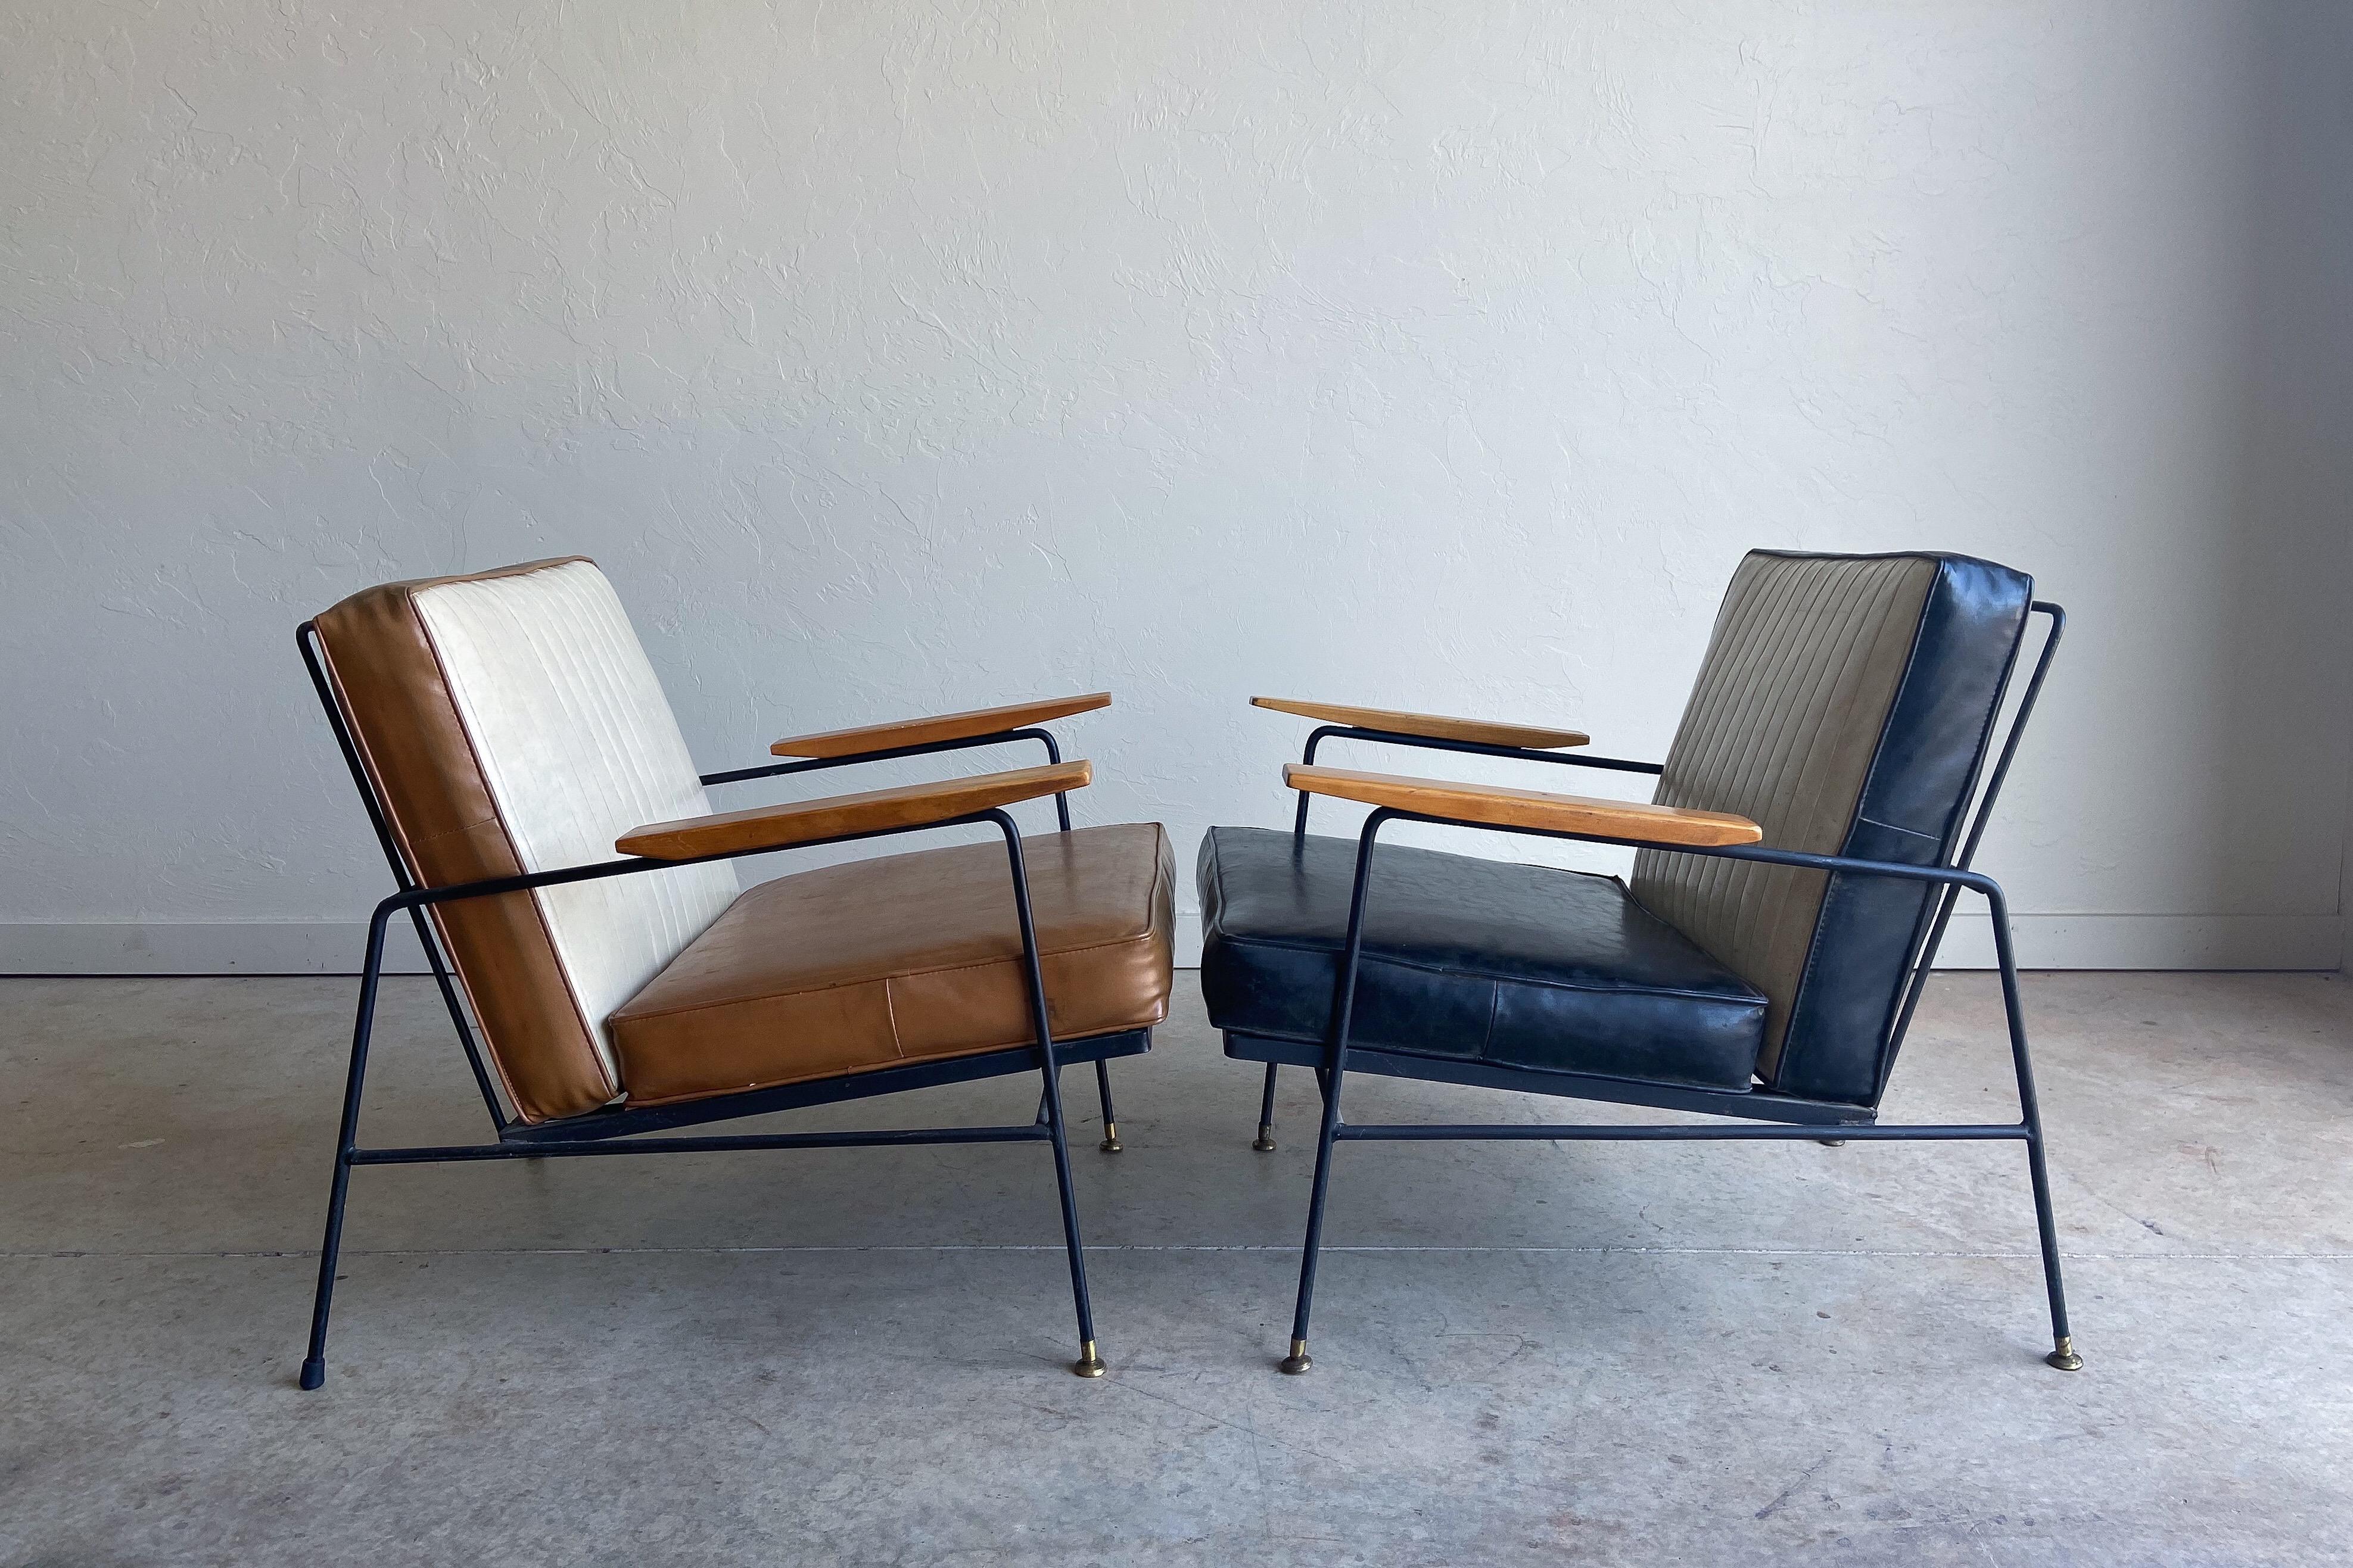 A fantastic pair of Richard McCarthy iron and wood lounge chairs. These are perfect examples of early American modern design- clean lines, quality construction, and functional. 

These have a great proportions and are quite comfortable. Each chair